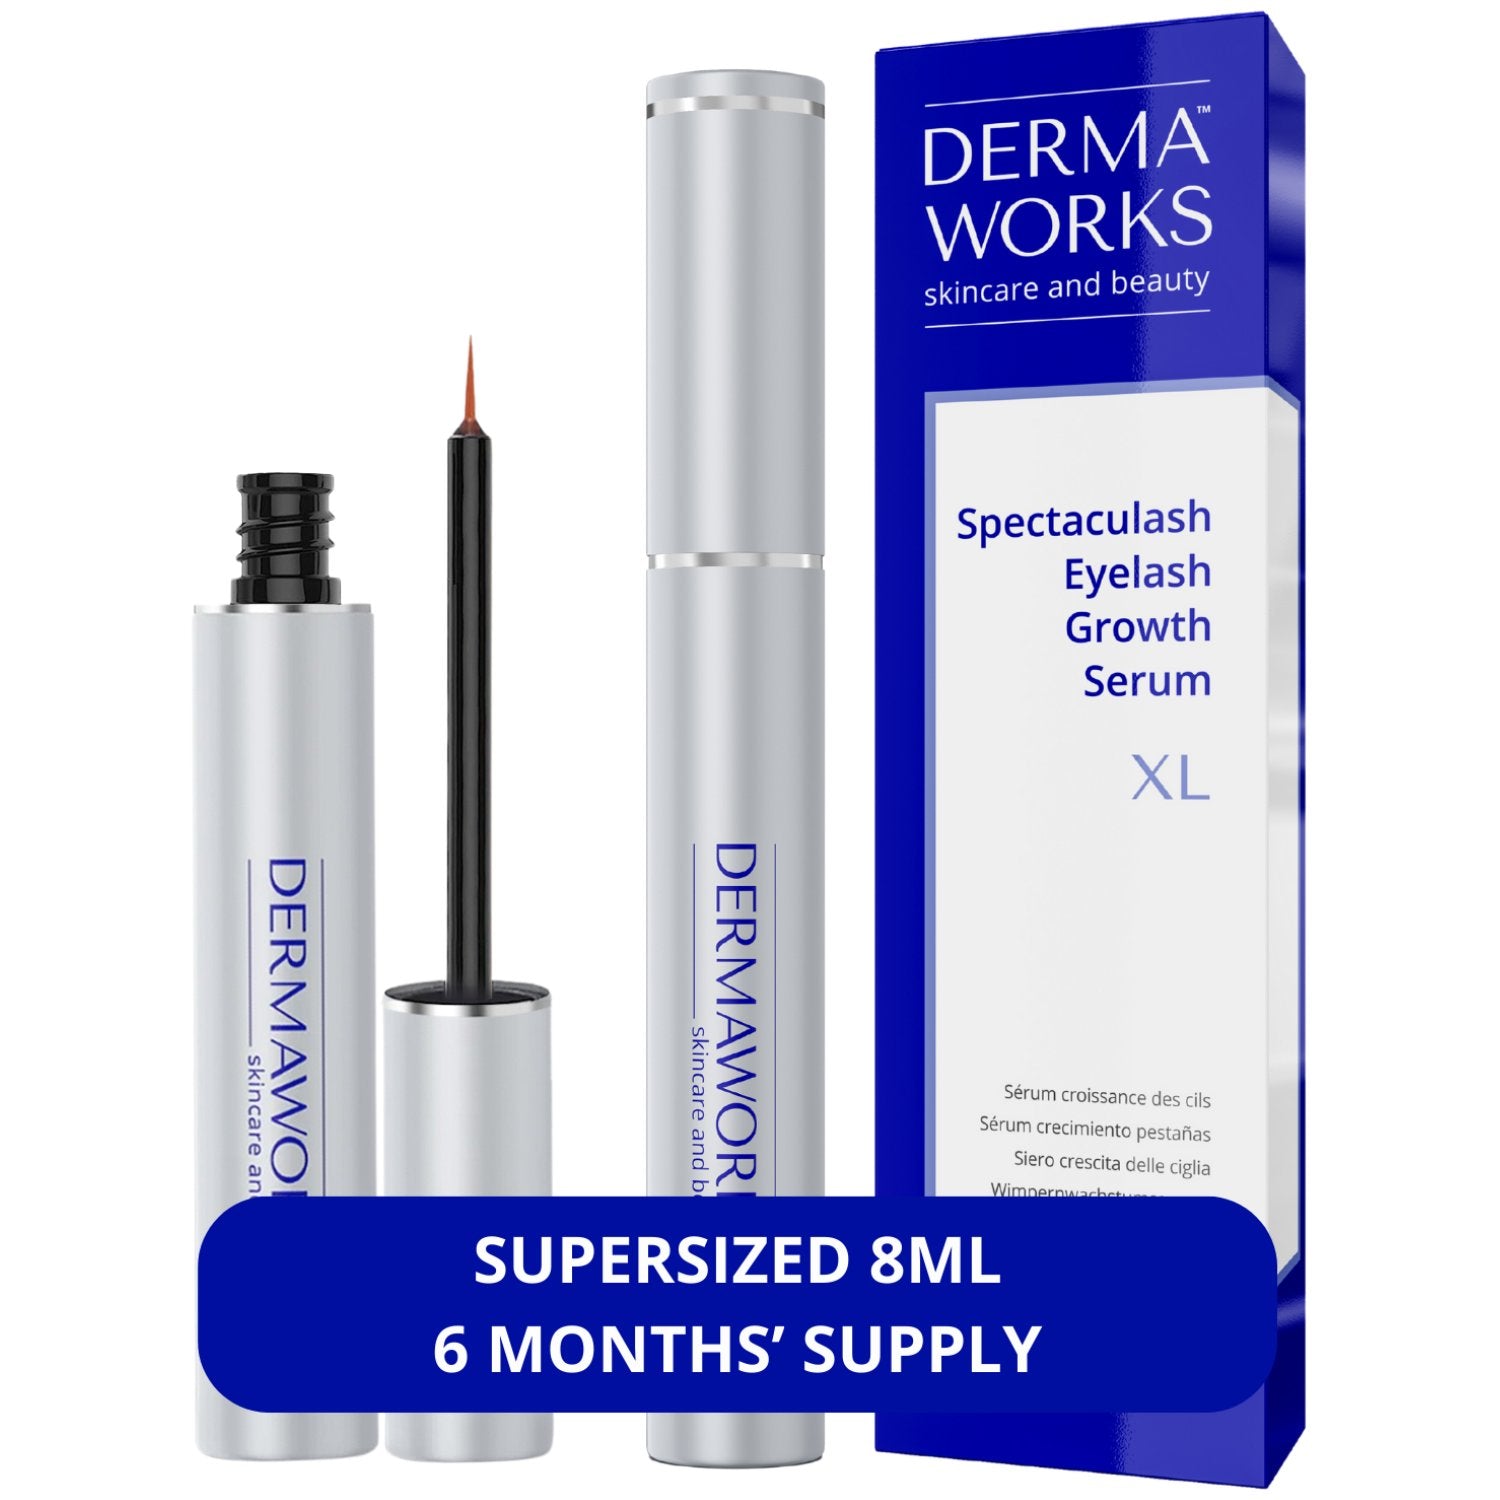 Spectaculash eyelash serum 'extra large' for growth and thickness by Dermaworks skincare and beauty 